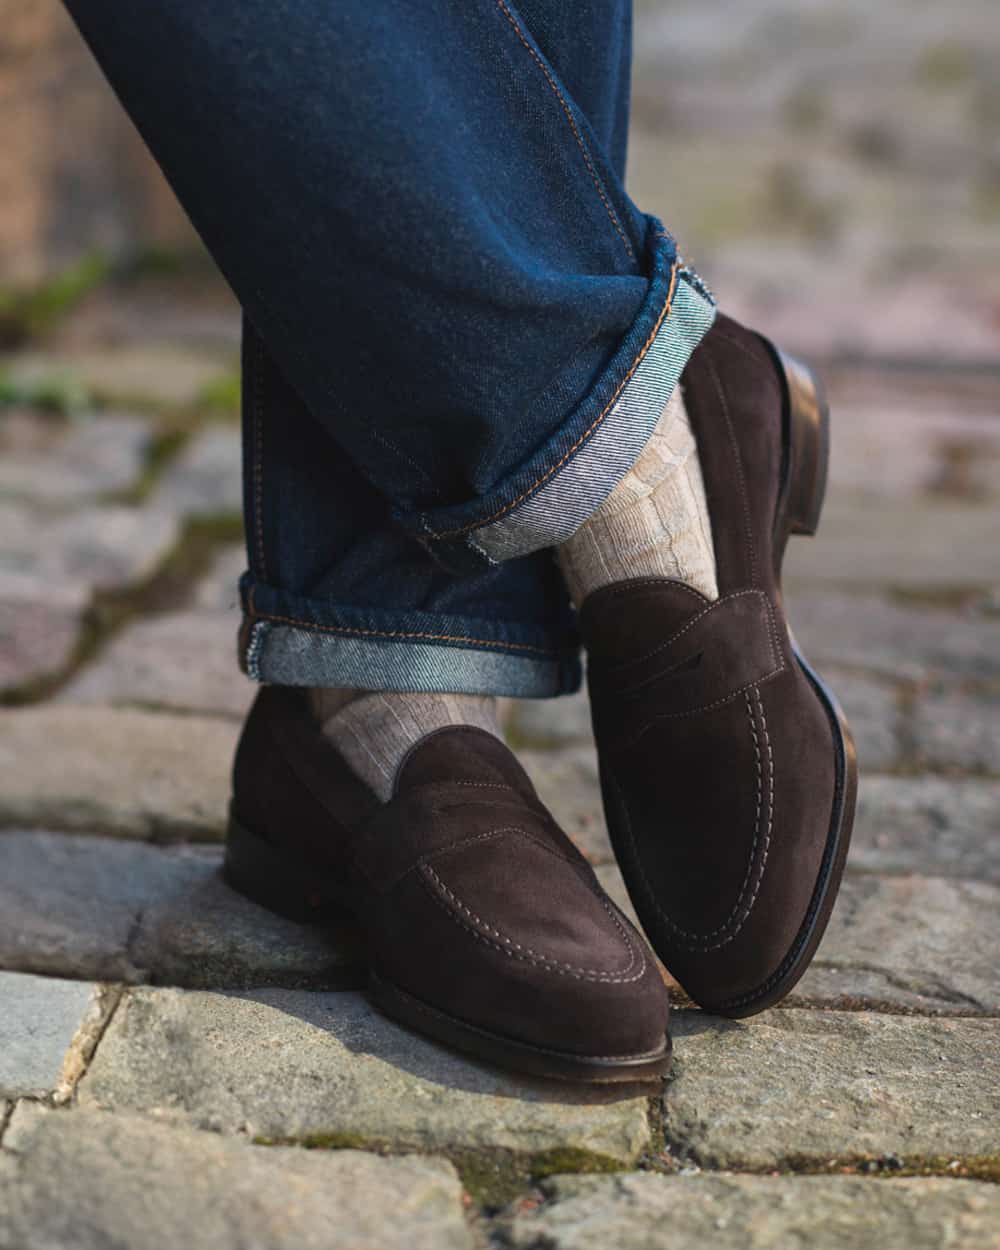 Man wearing brown suede Loake penny loafers with beige socks and blue turned up jeans